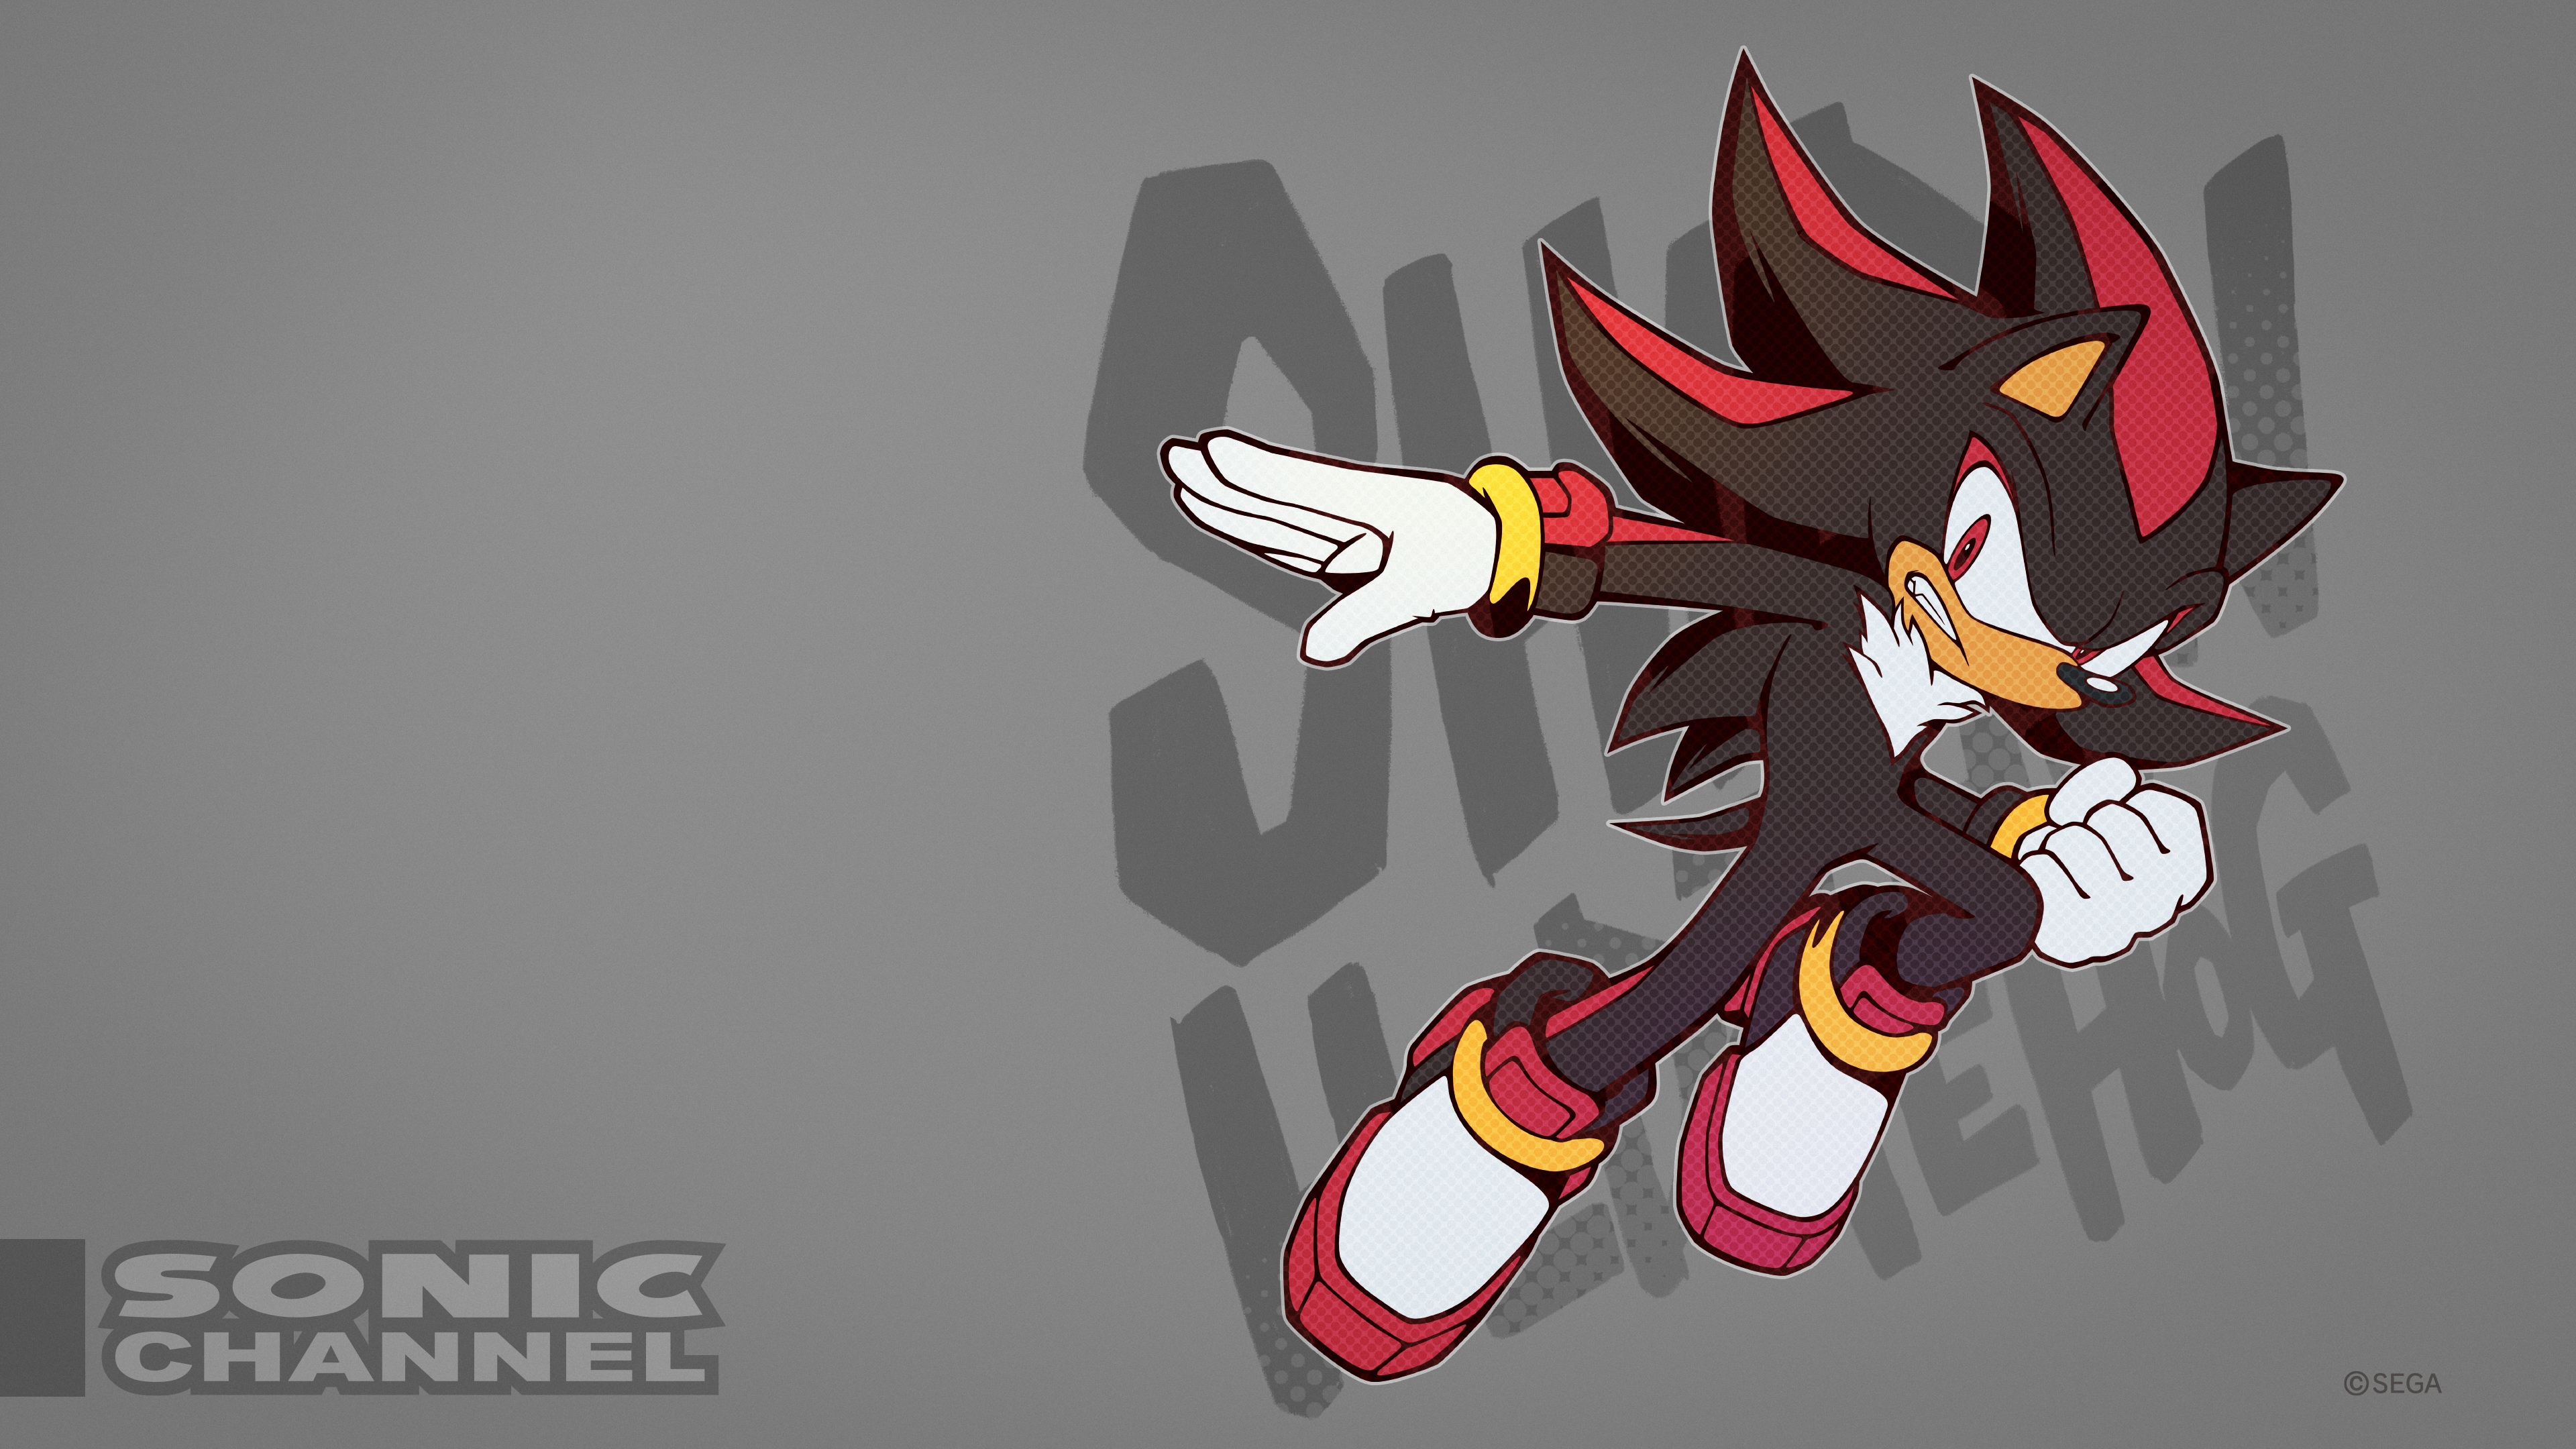 Combining 5 Sonic Characters Into 1! (sonic, Tails, Shadow